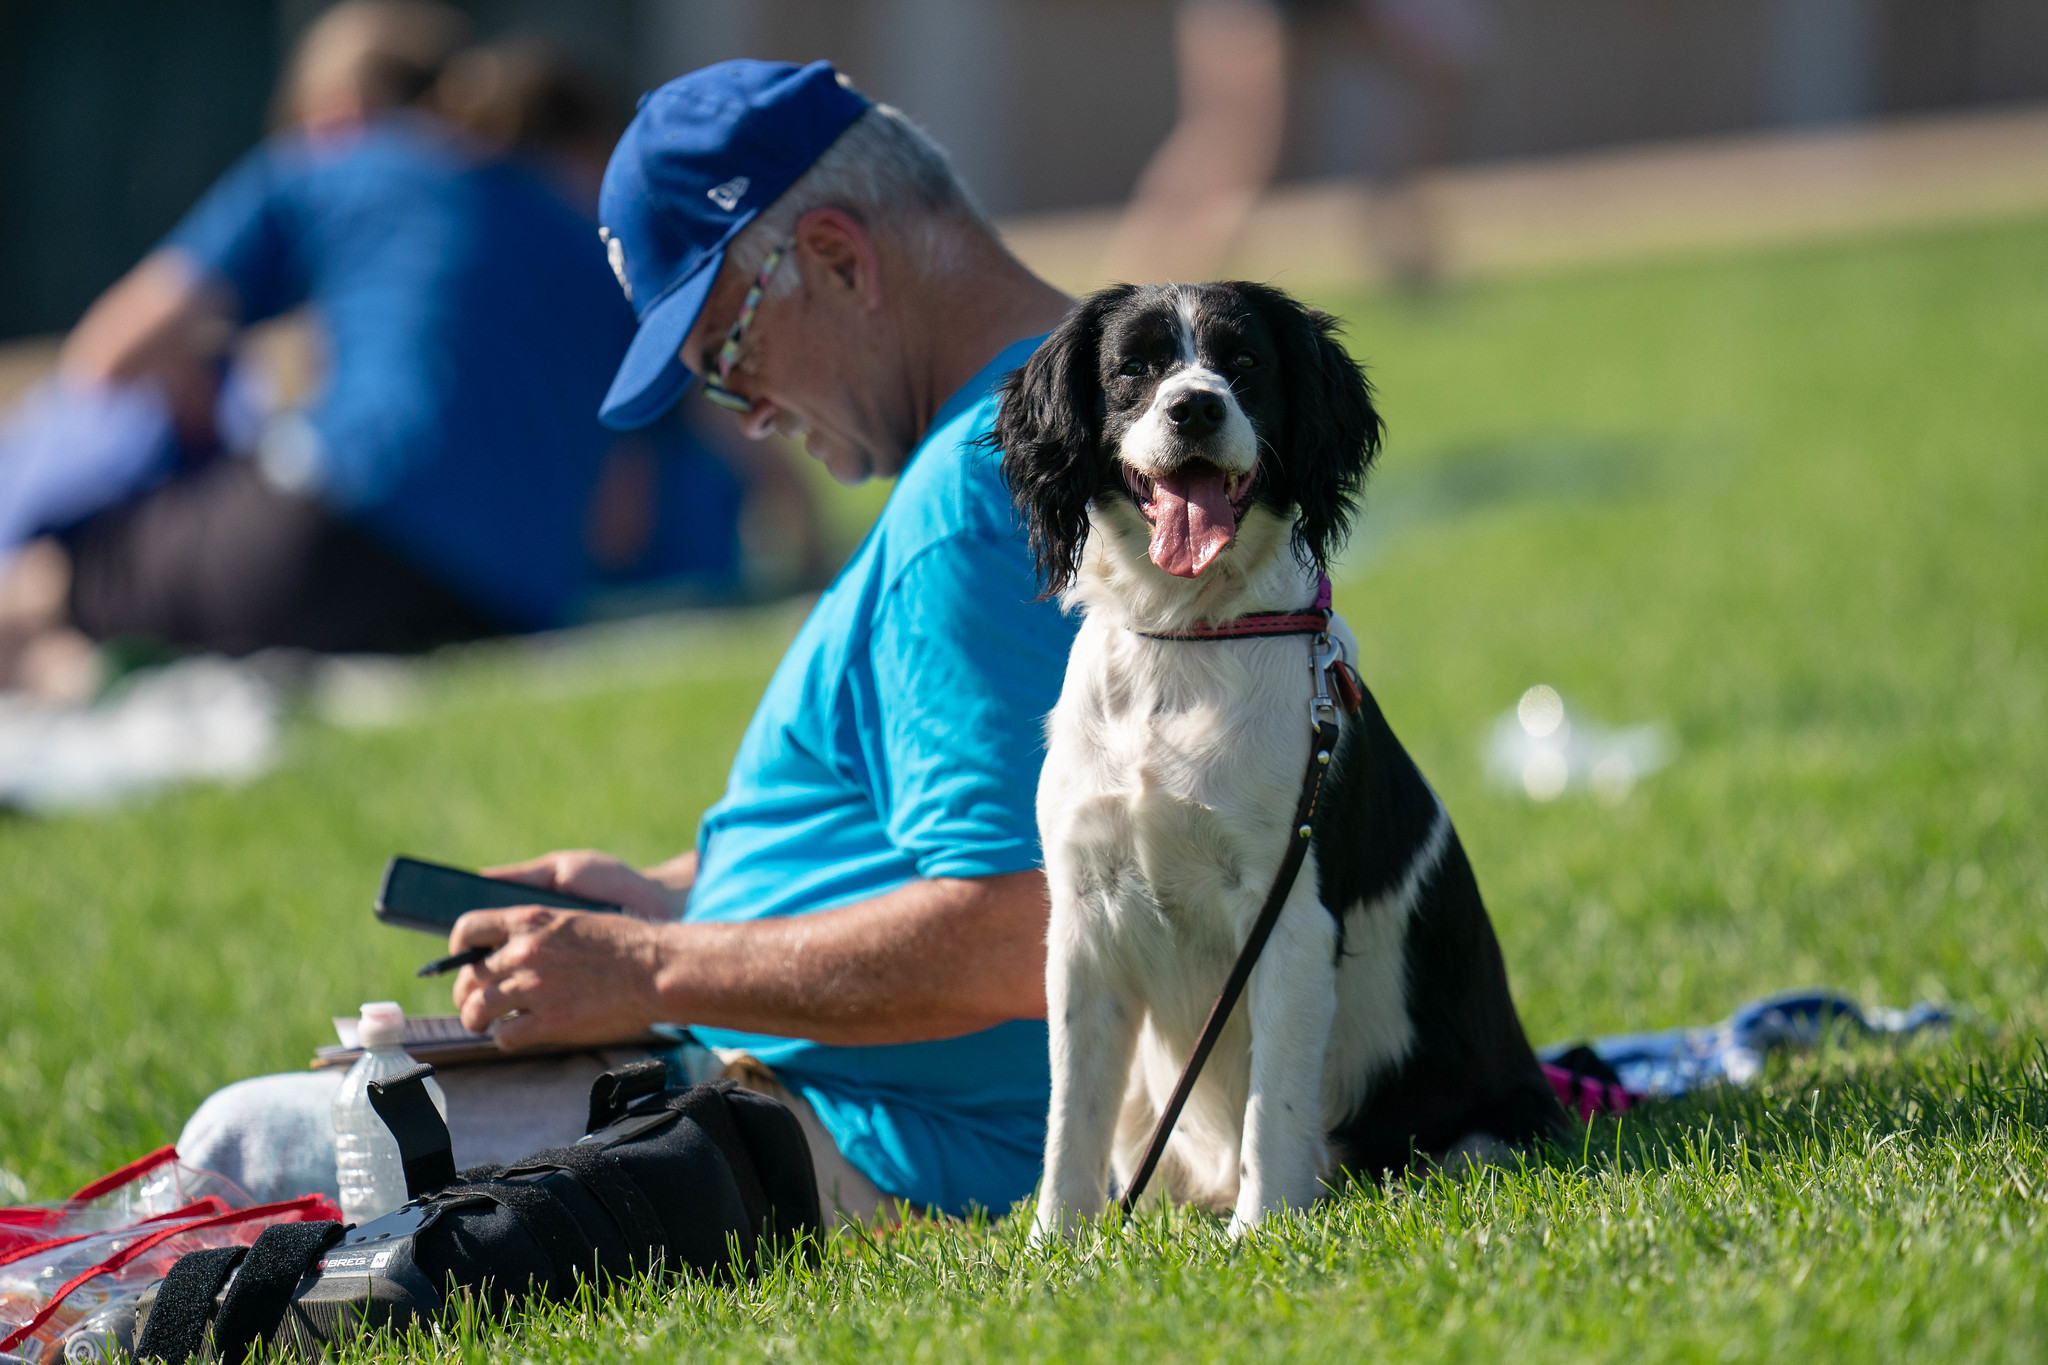 A black-and-white dog with longer fur on their ears sits up straight, next to a man in a blue t-shirt who is sitting facing away. Both are sitting in grass.